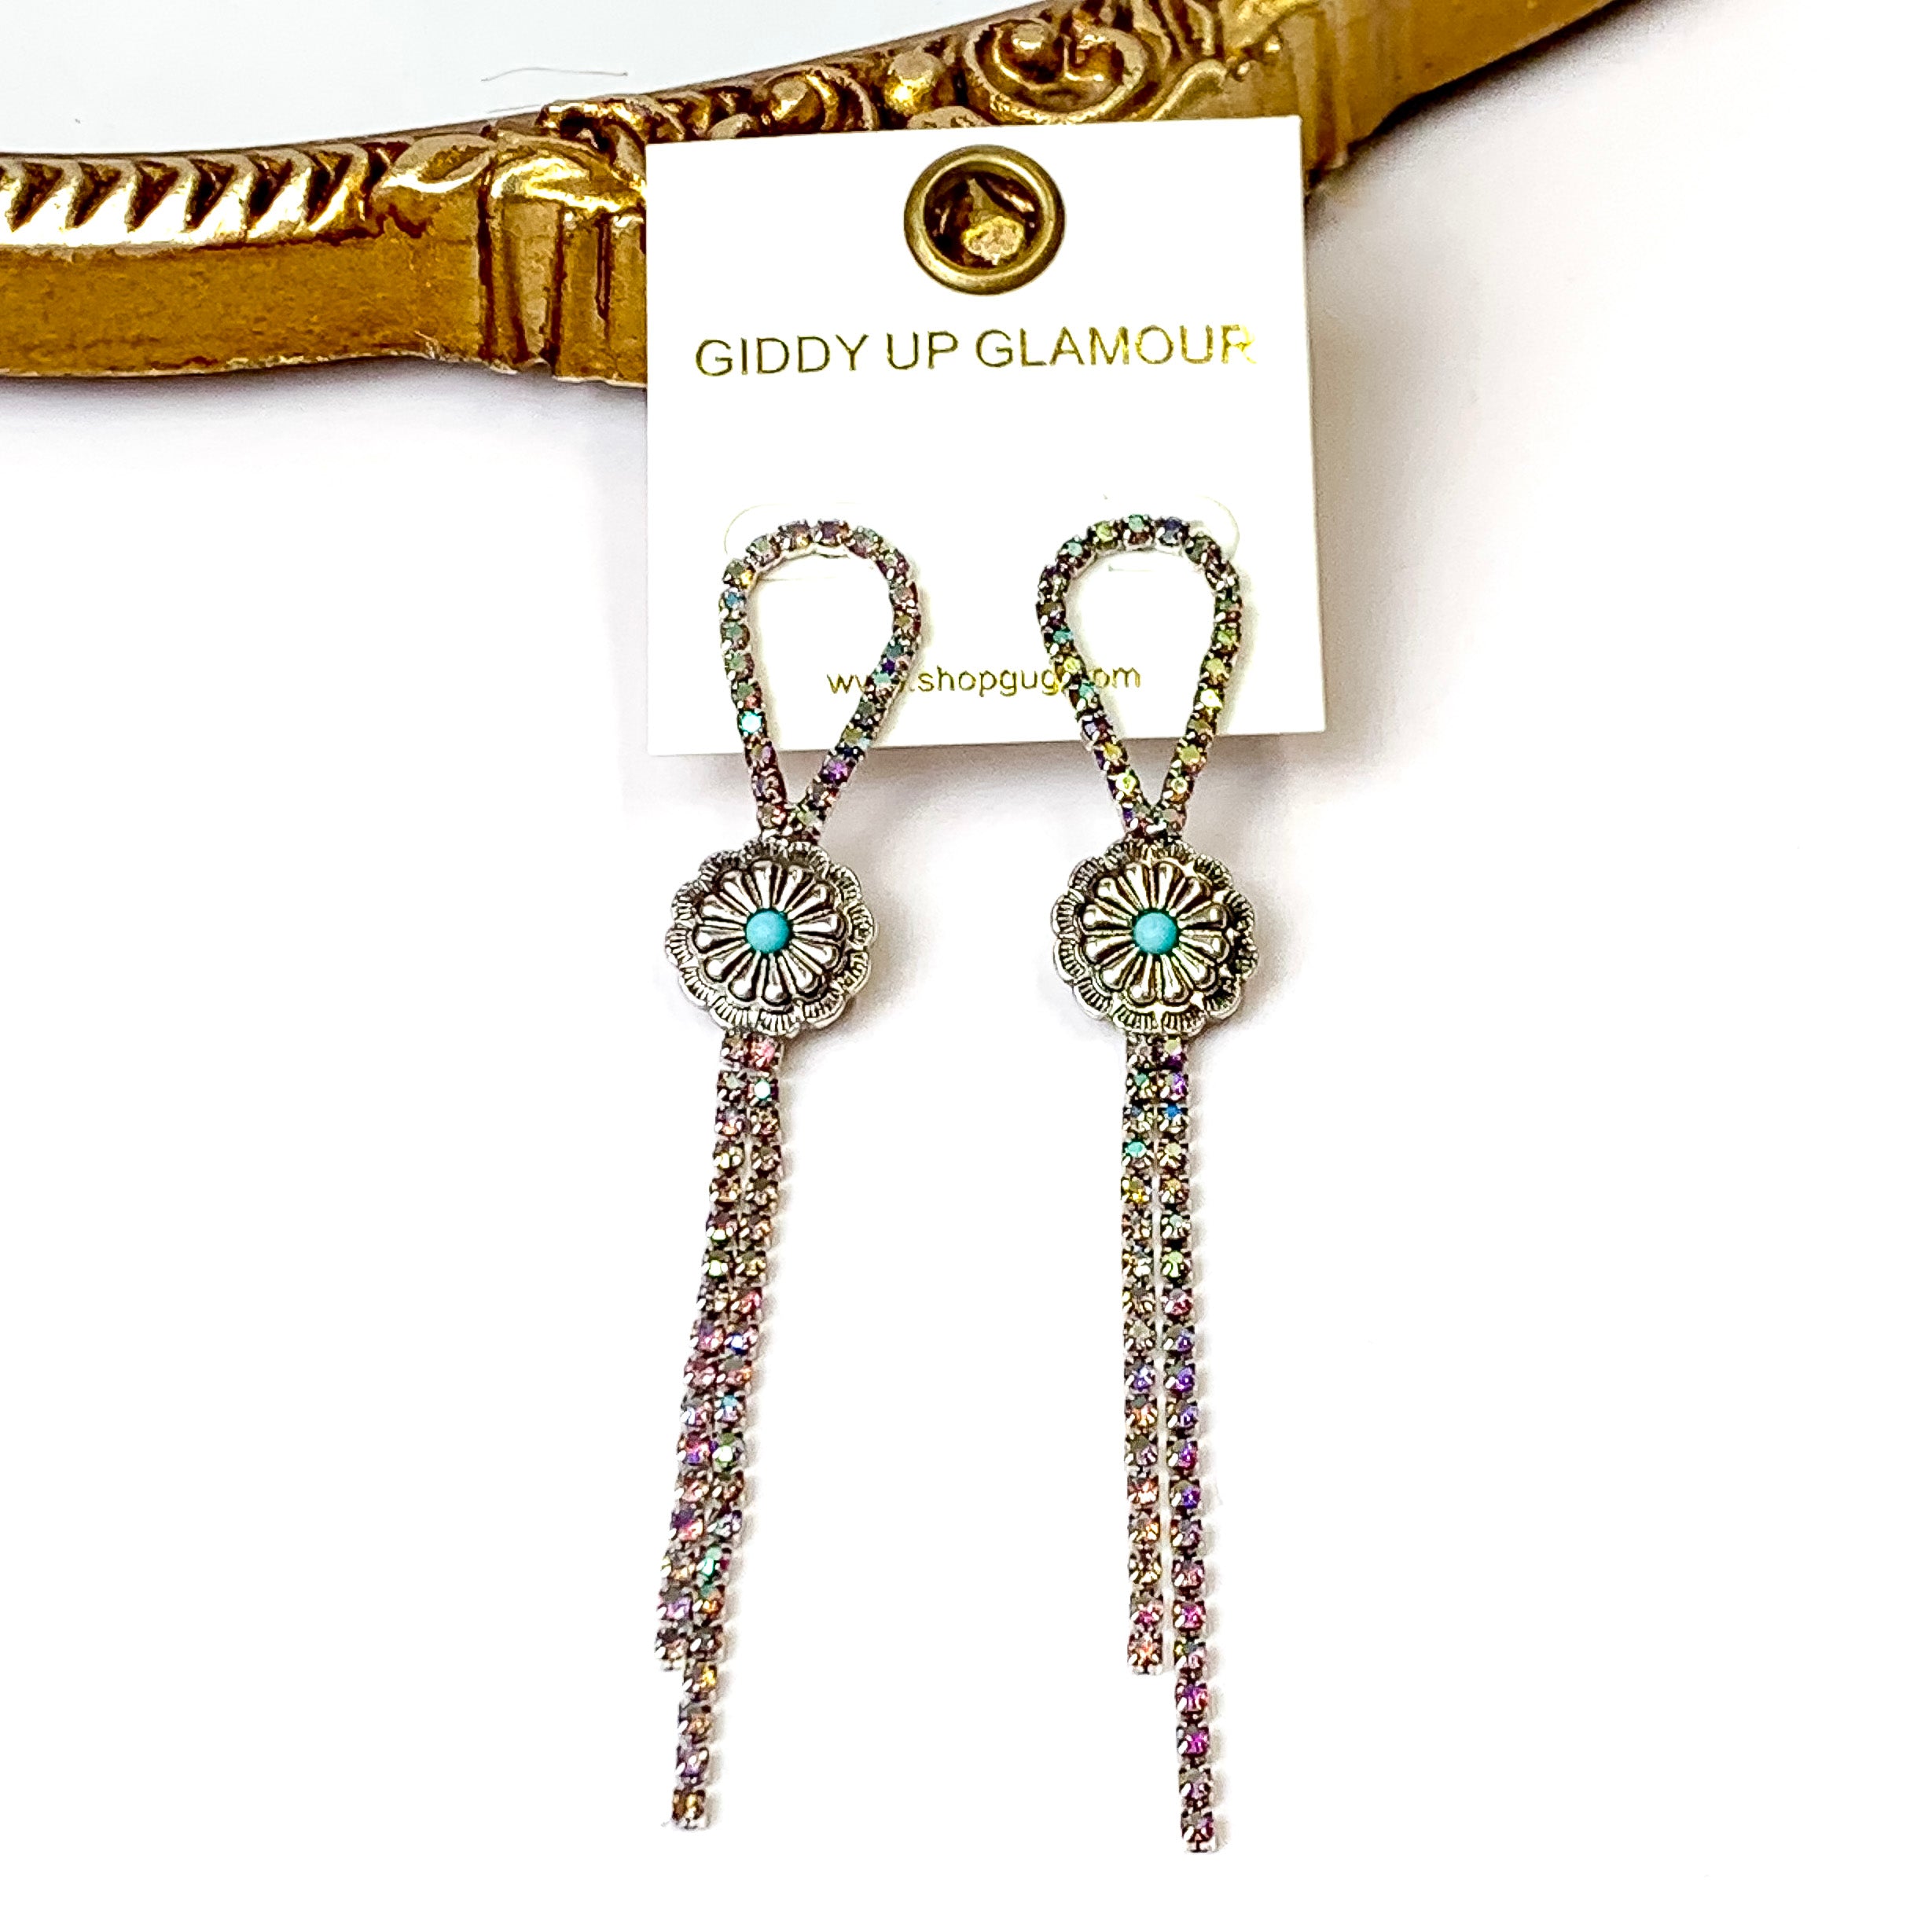 AB Crystal Bolo Tie Tassel Earrings with Circle Concho in Silver Tone - Giddy Up Glamour Boutique